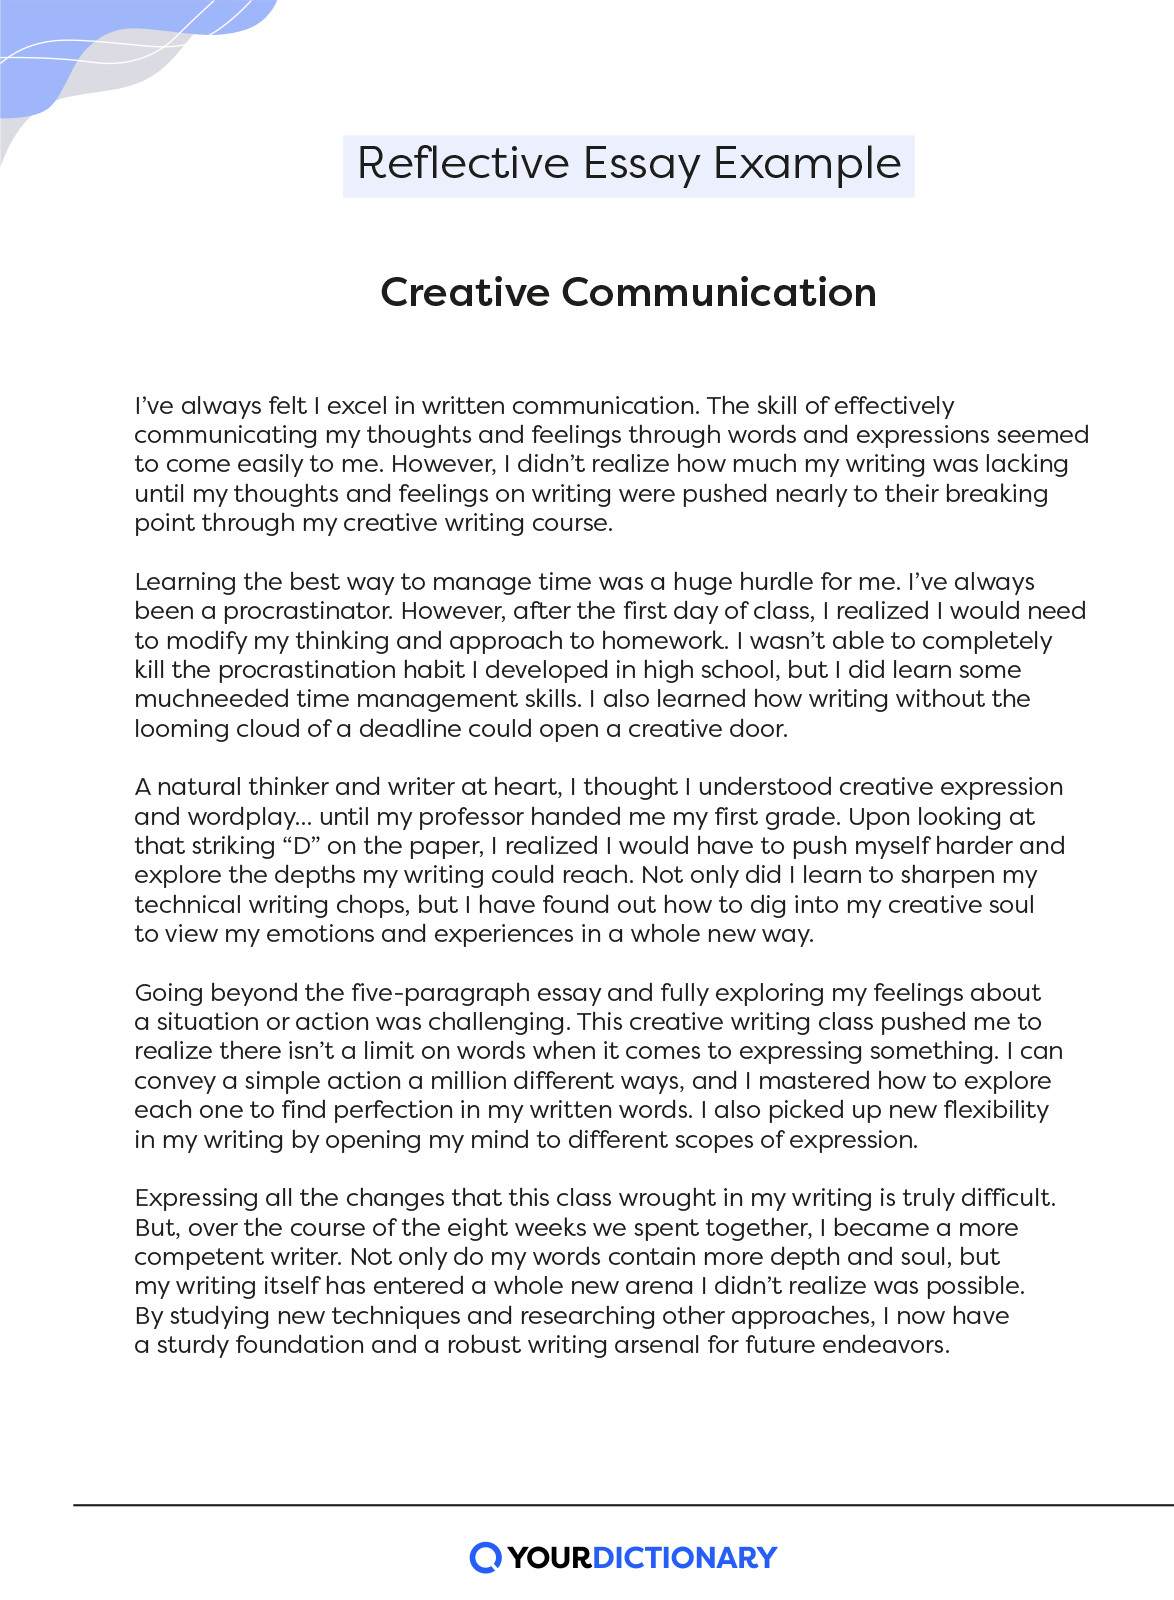 Reflective Essay Example about communication